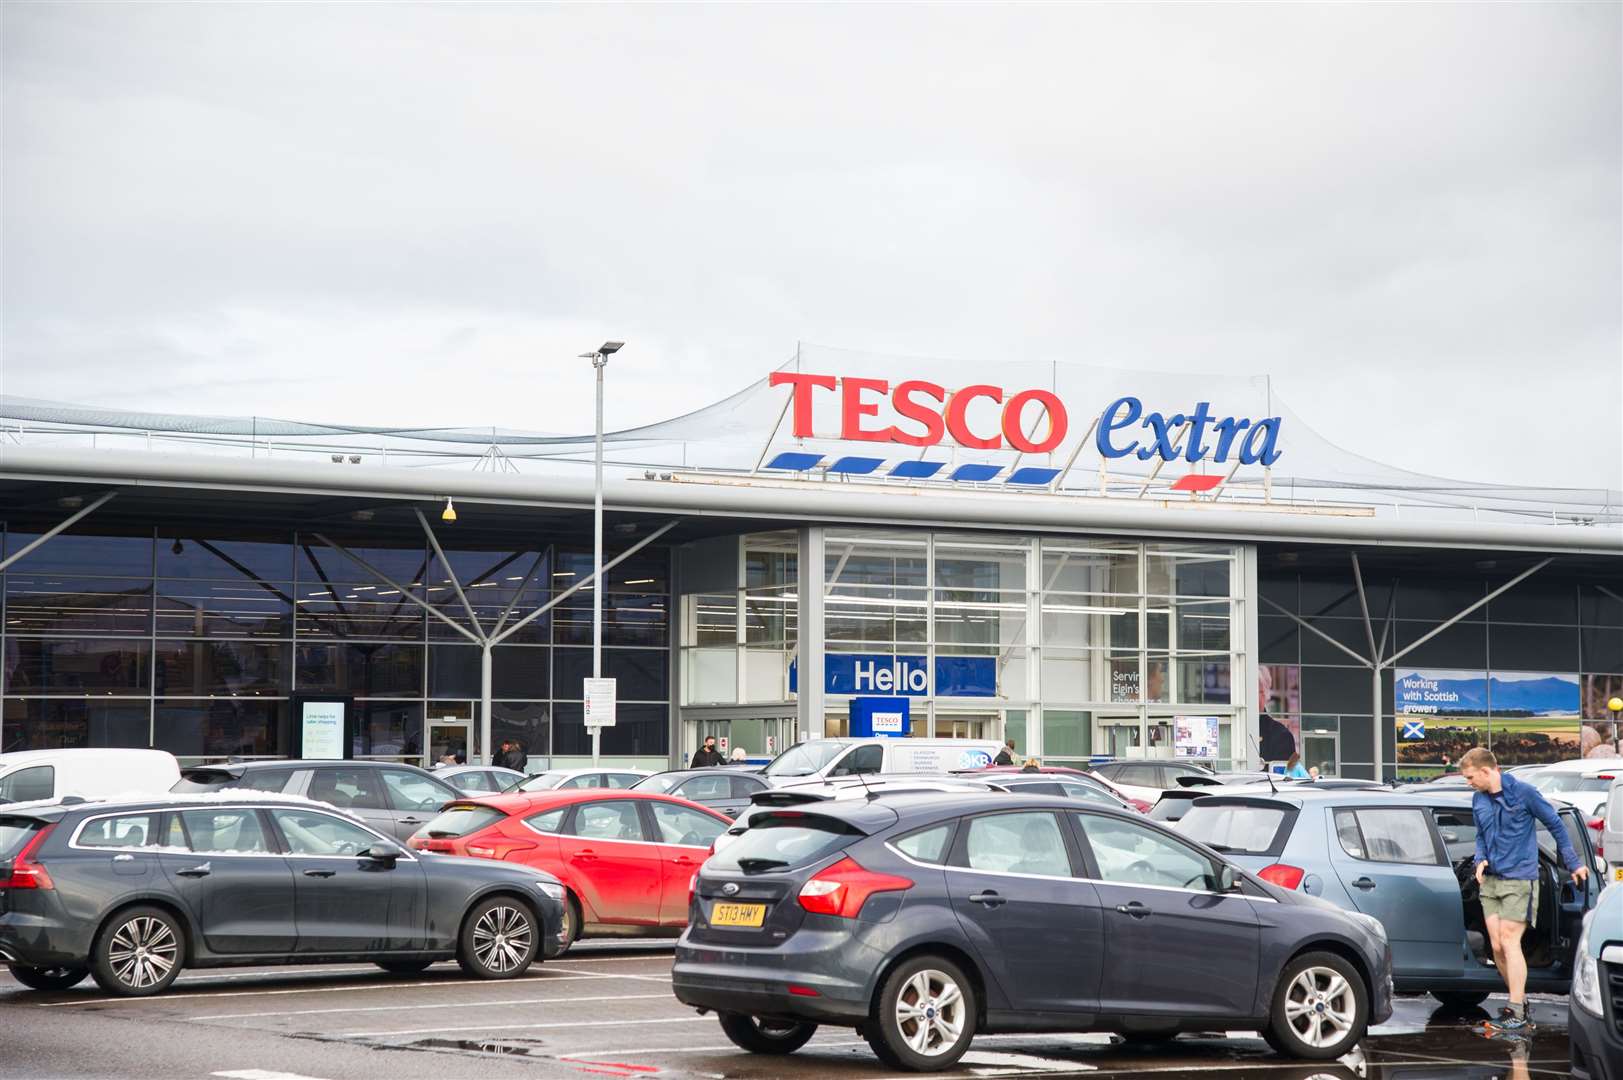 There have been two separate instances of employees at Tesco in Elgin catching Covid-19.